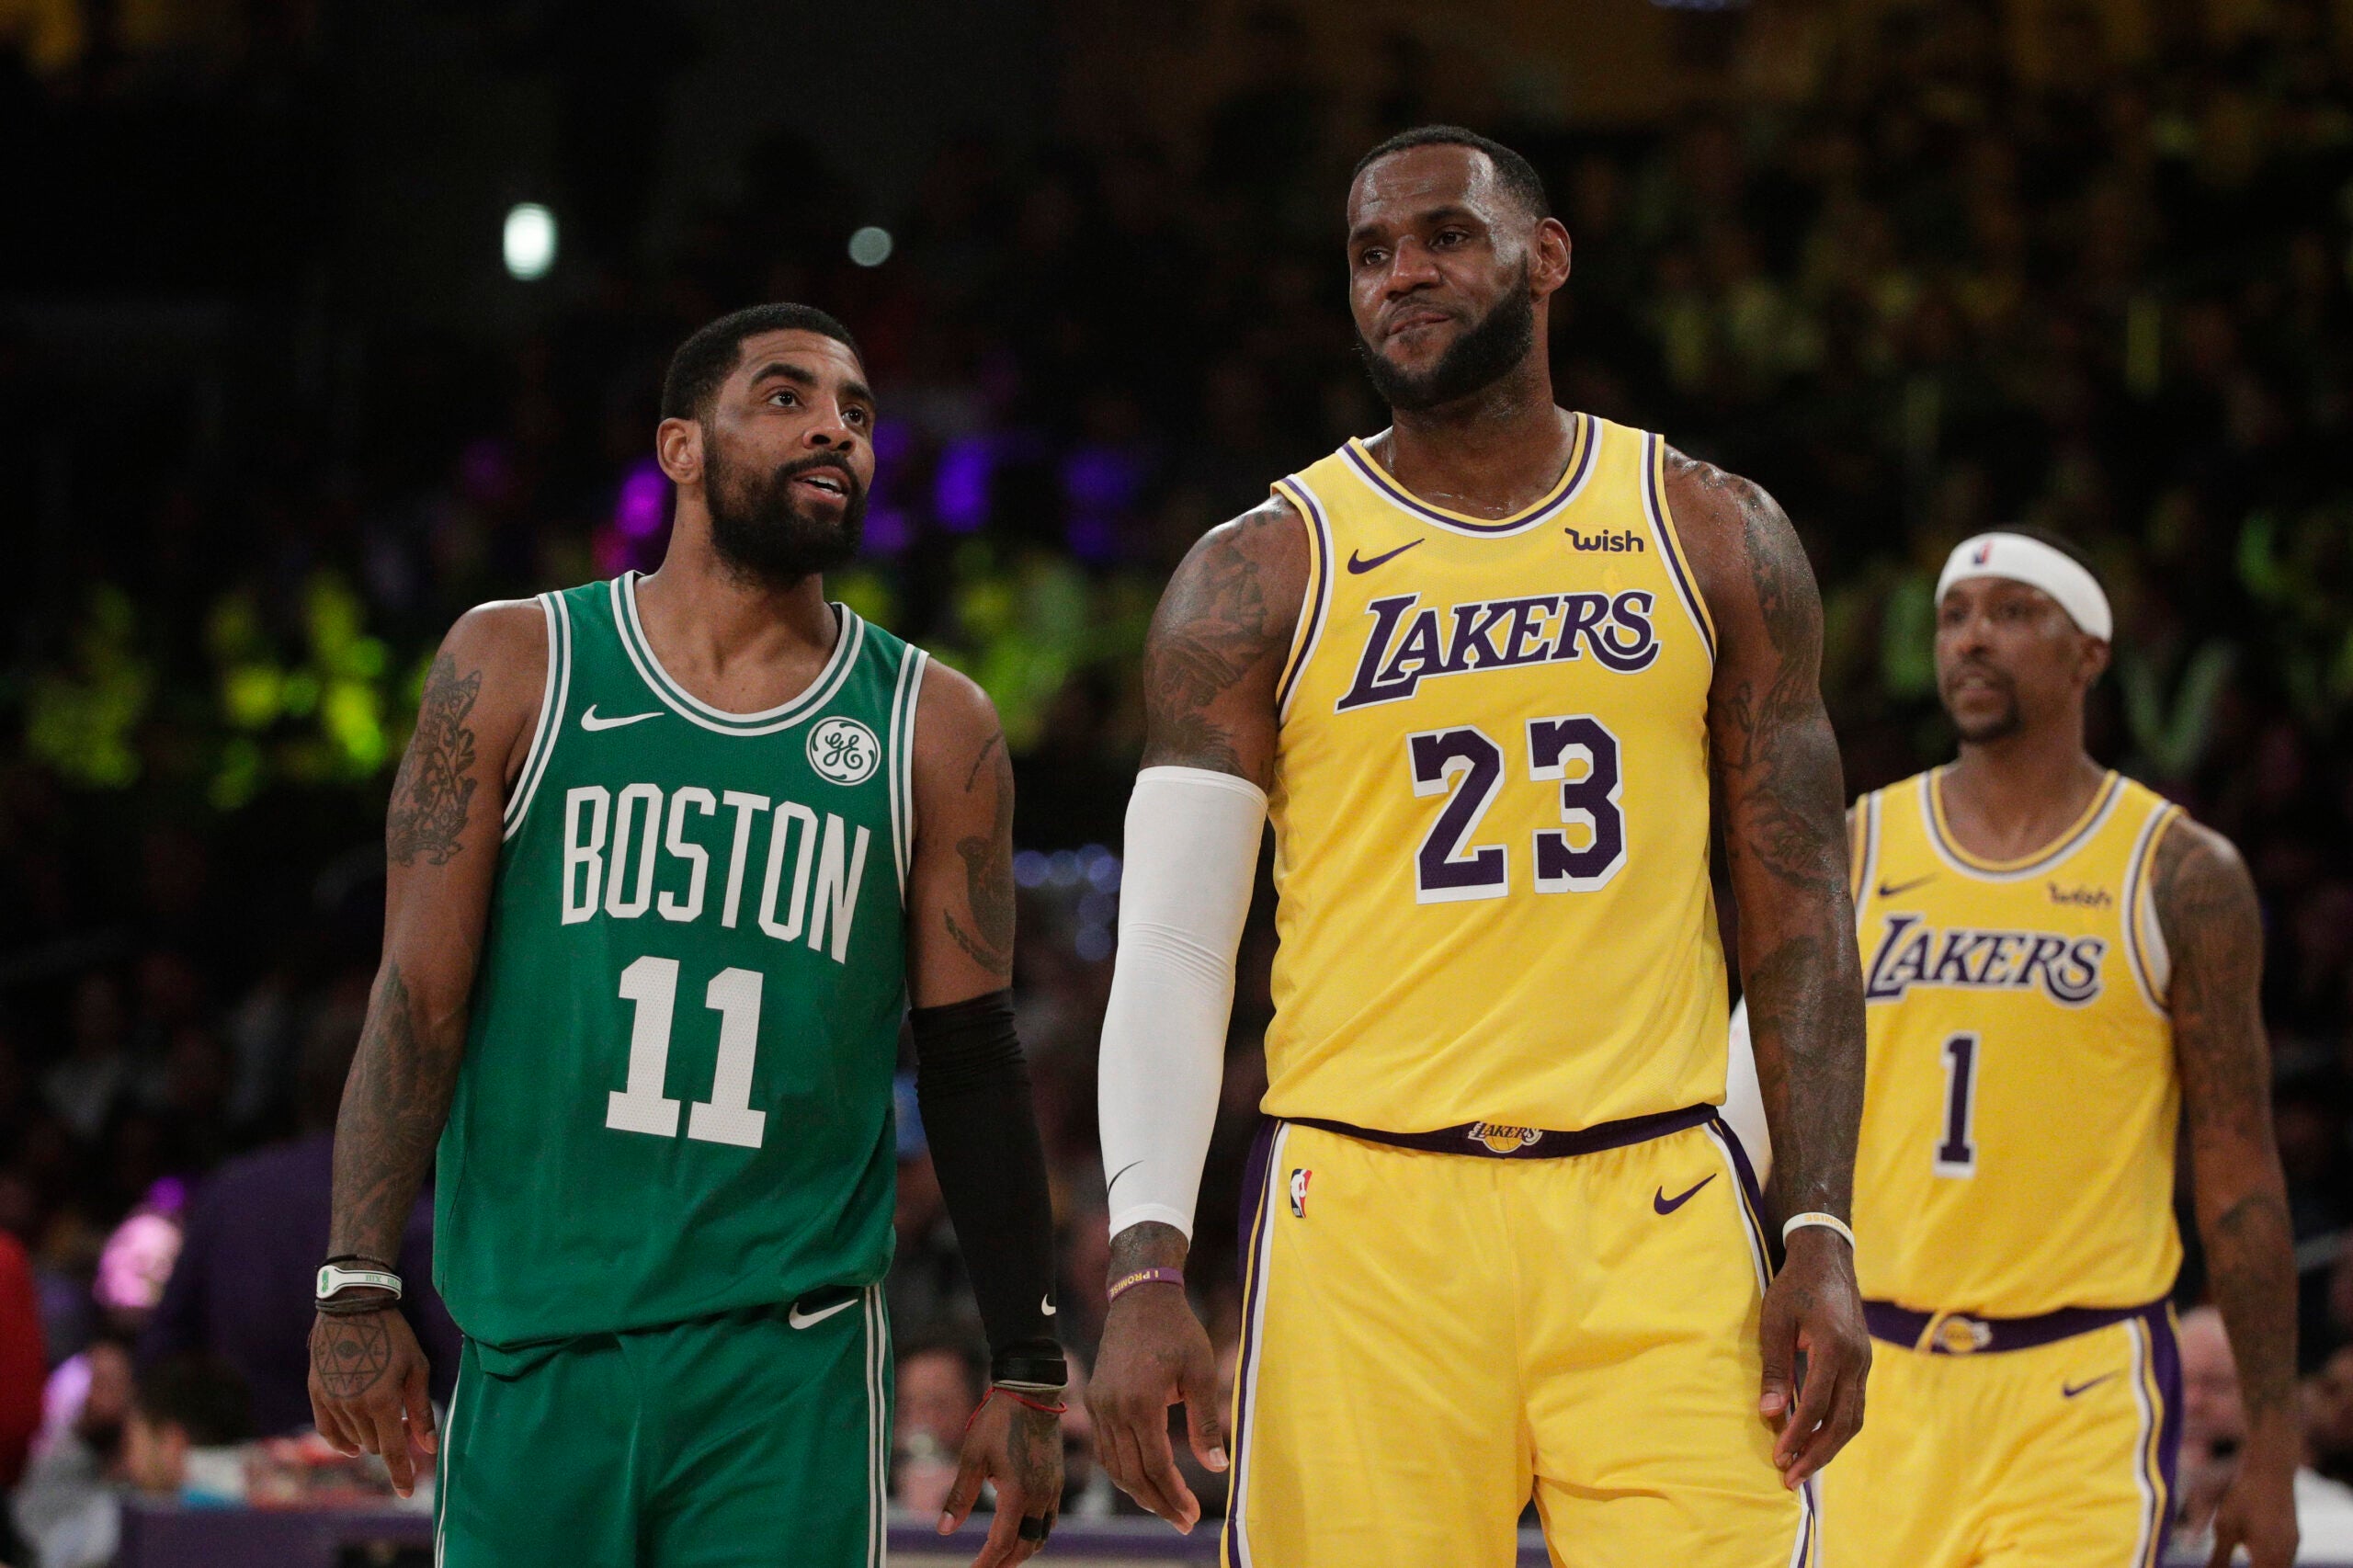 A Kyrie Irving-LeBron James reunion might not be unthinkable after all